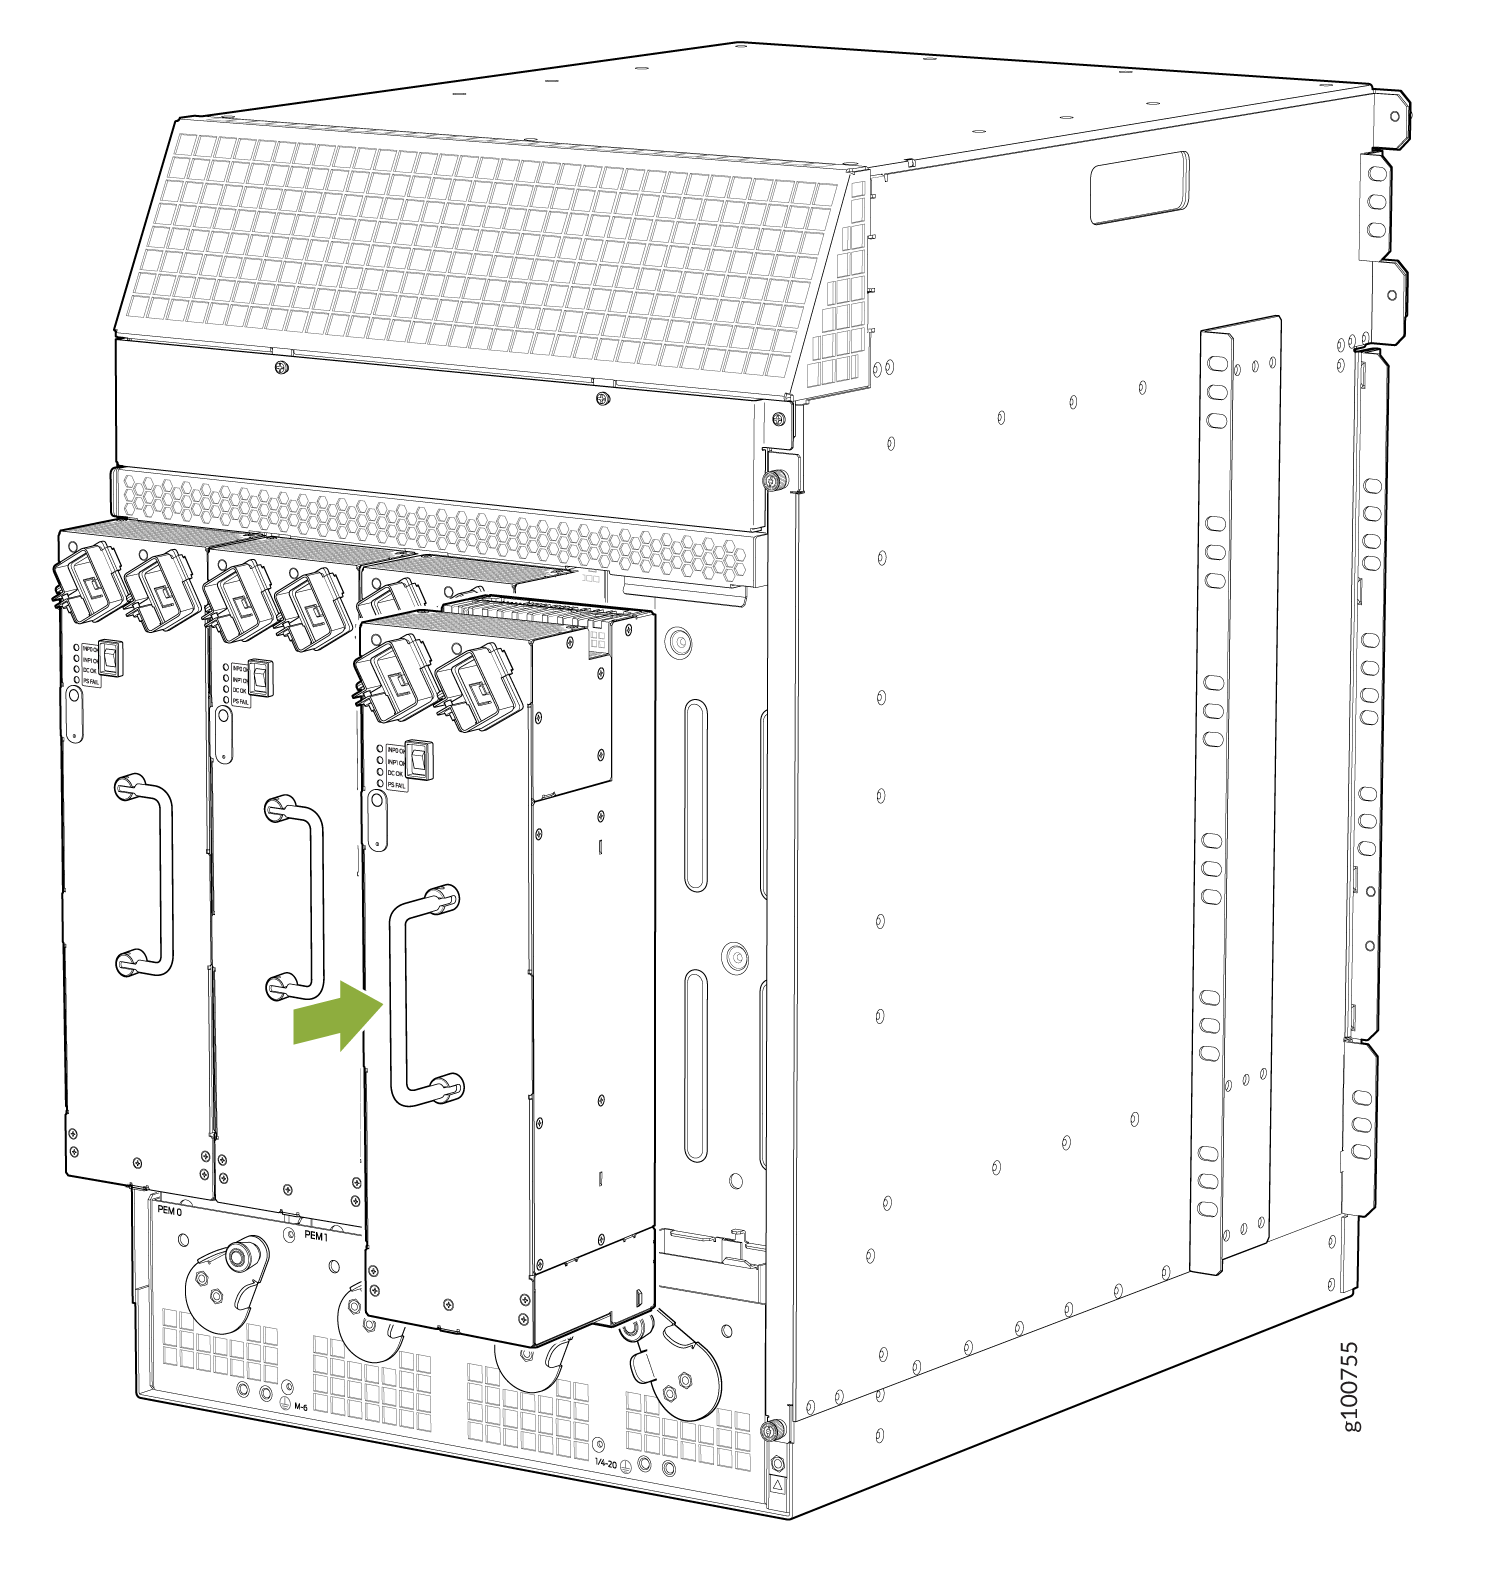 Installing a High-Capacity Second-Generation AC Power Supply